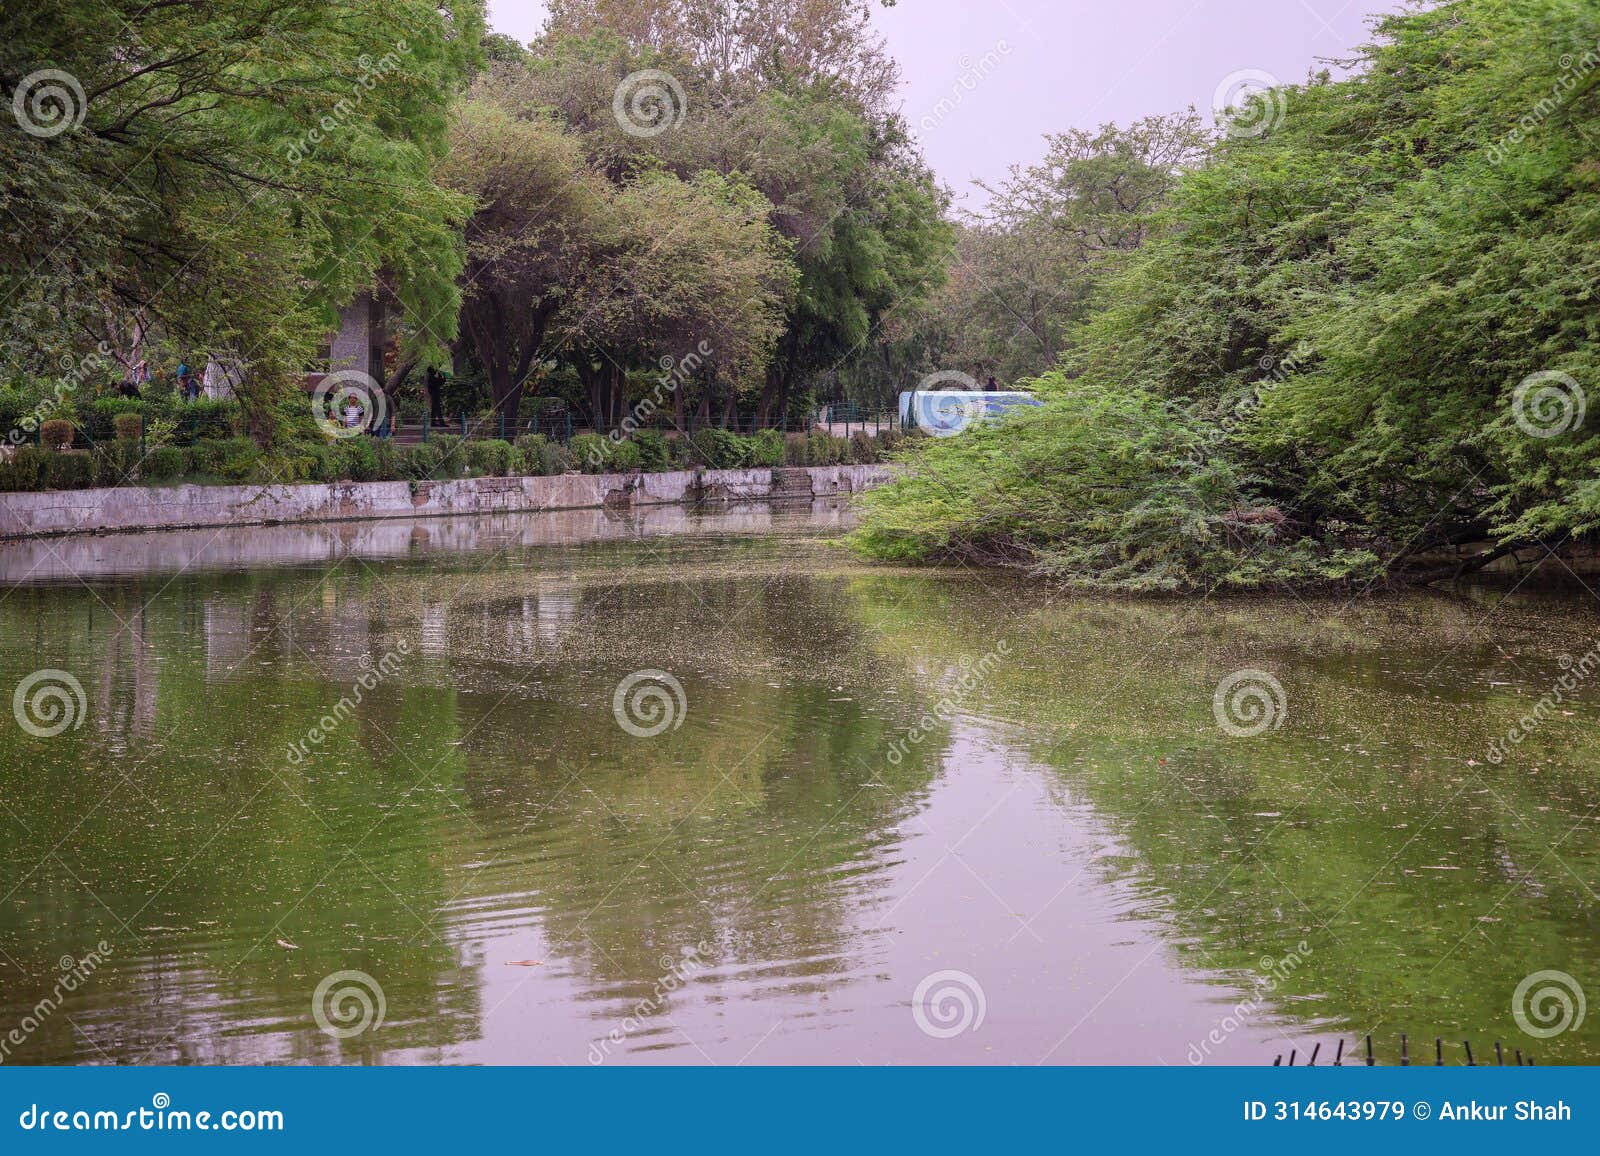 random tree picture at delhi zoological park india surrounded with water body